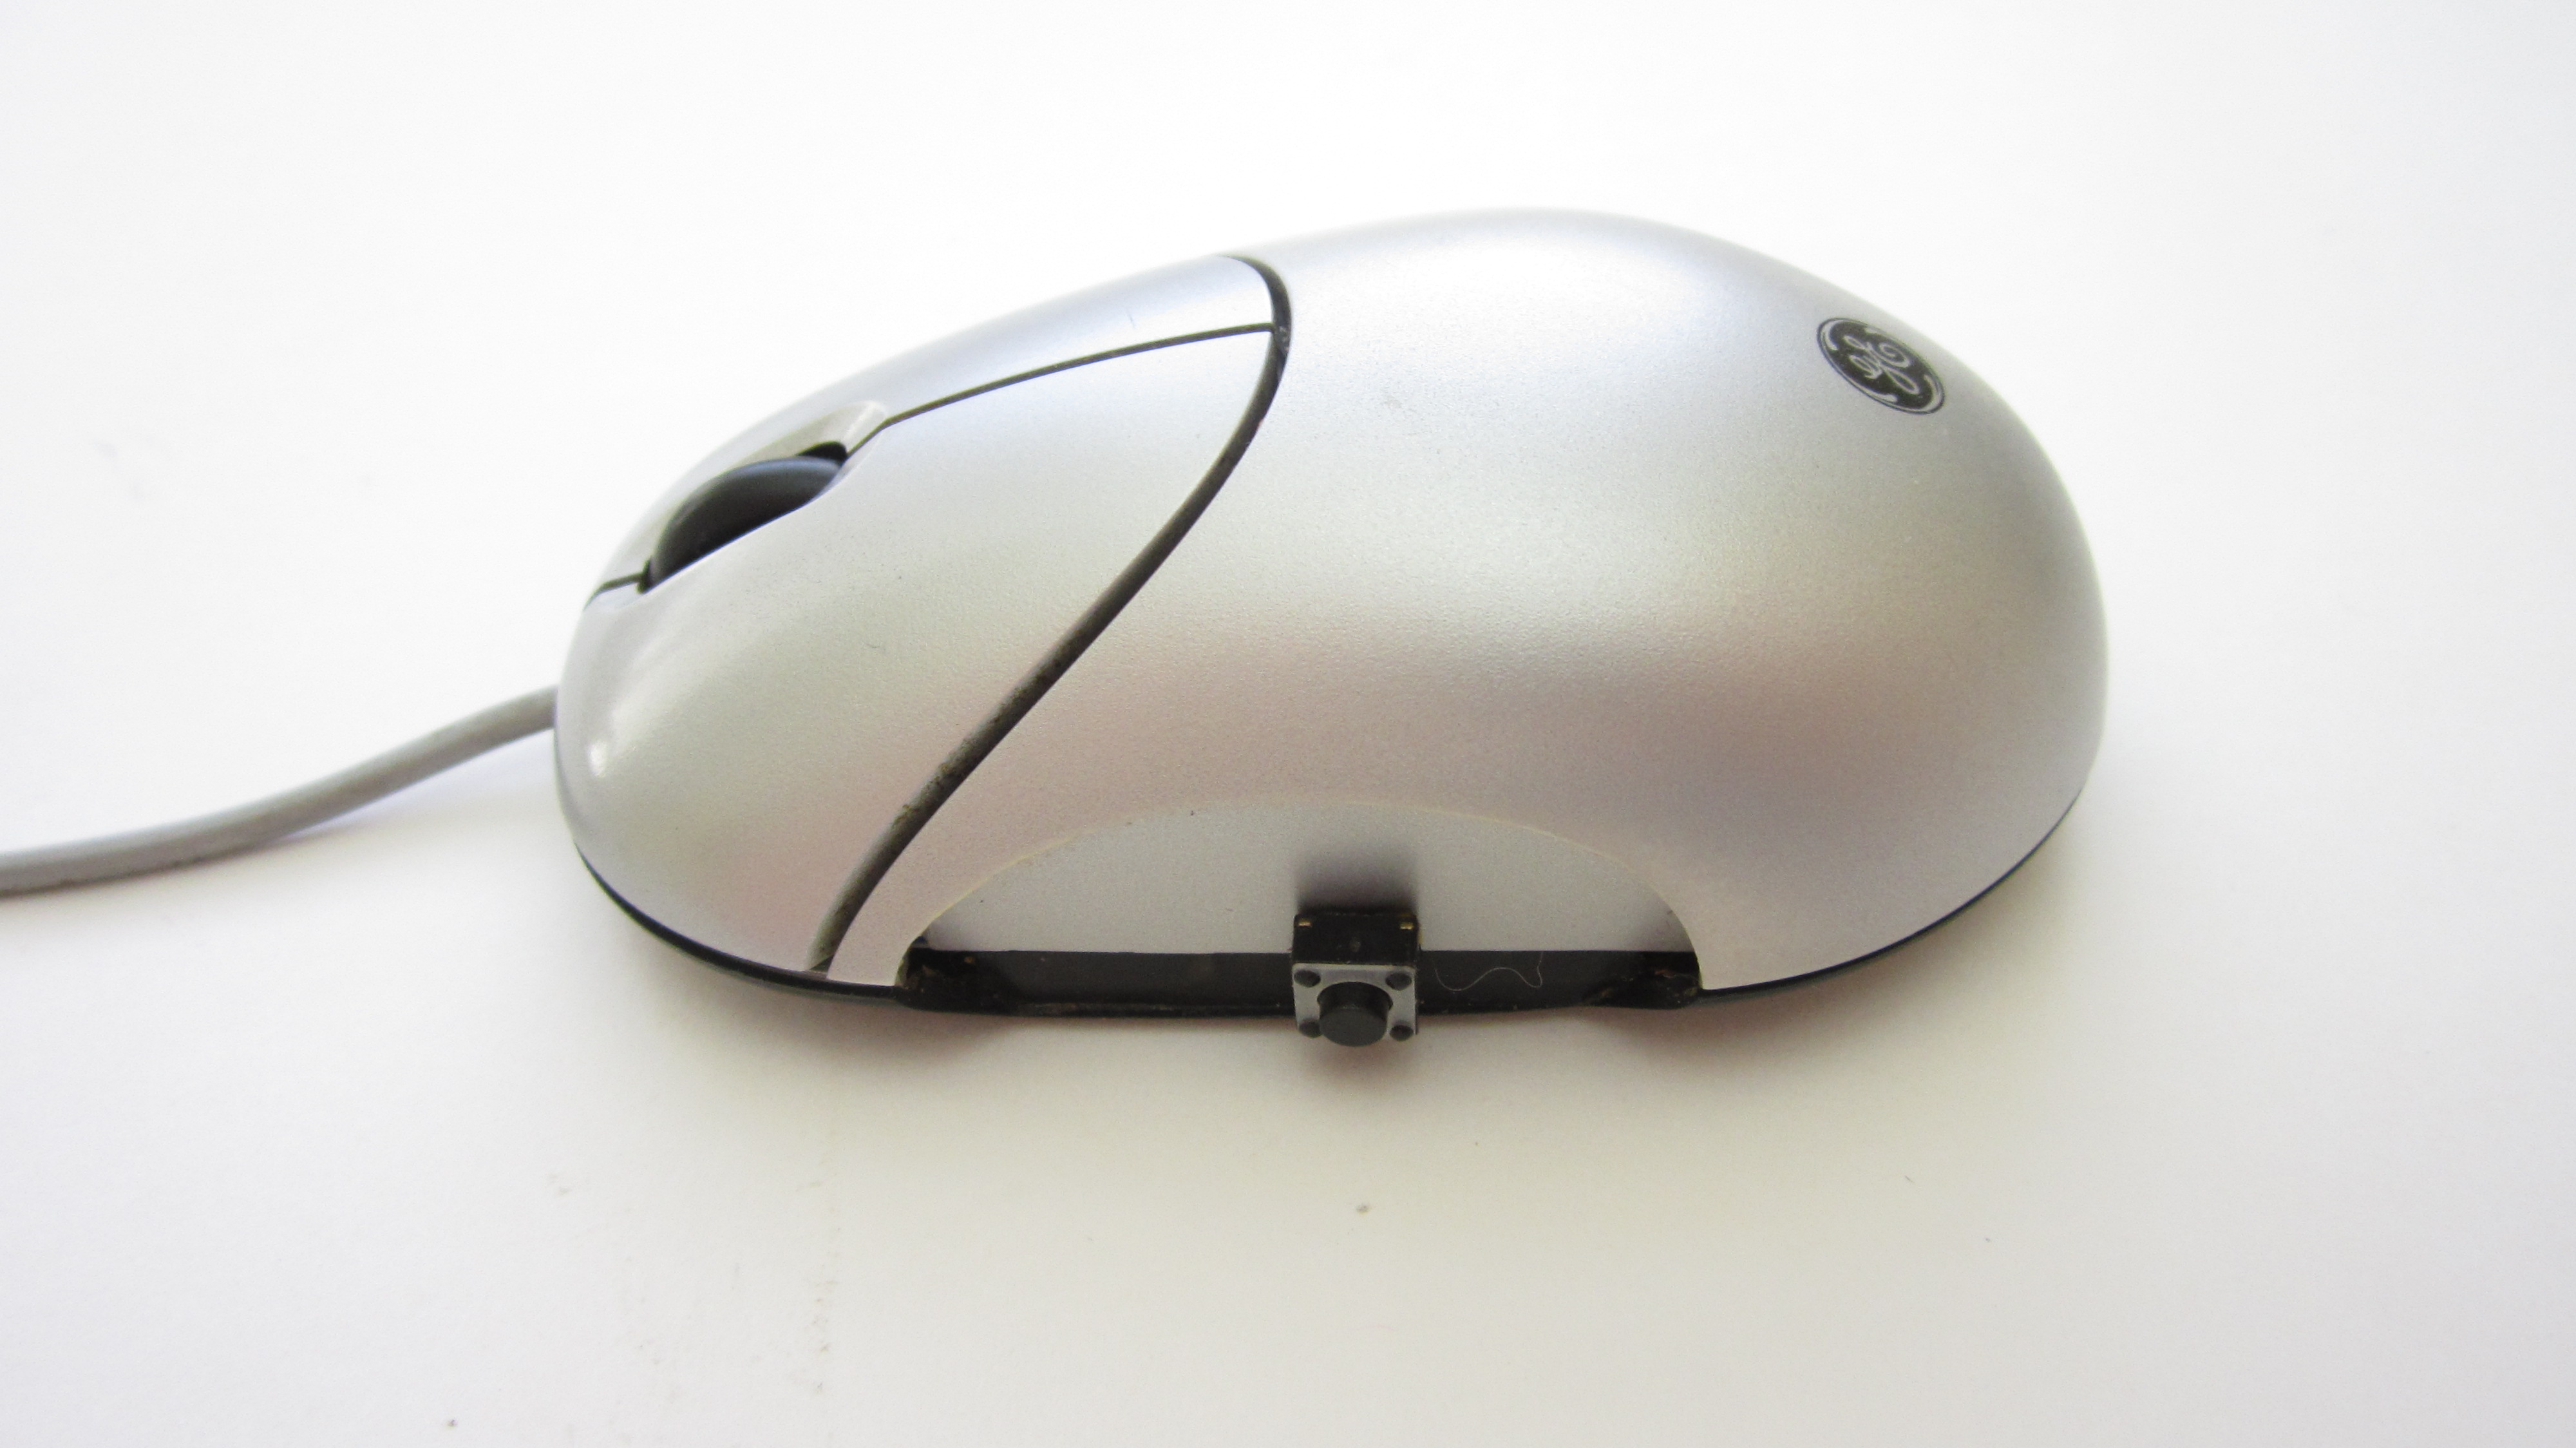 DIY Hacks & How To’s: Rapid Fire Mouse Button